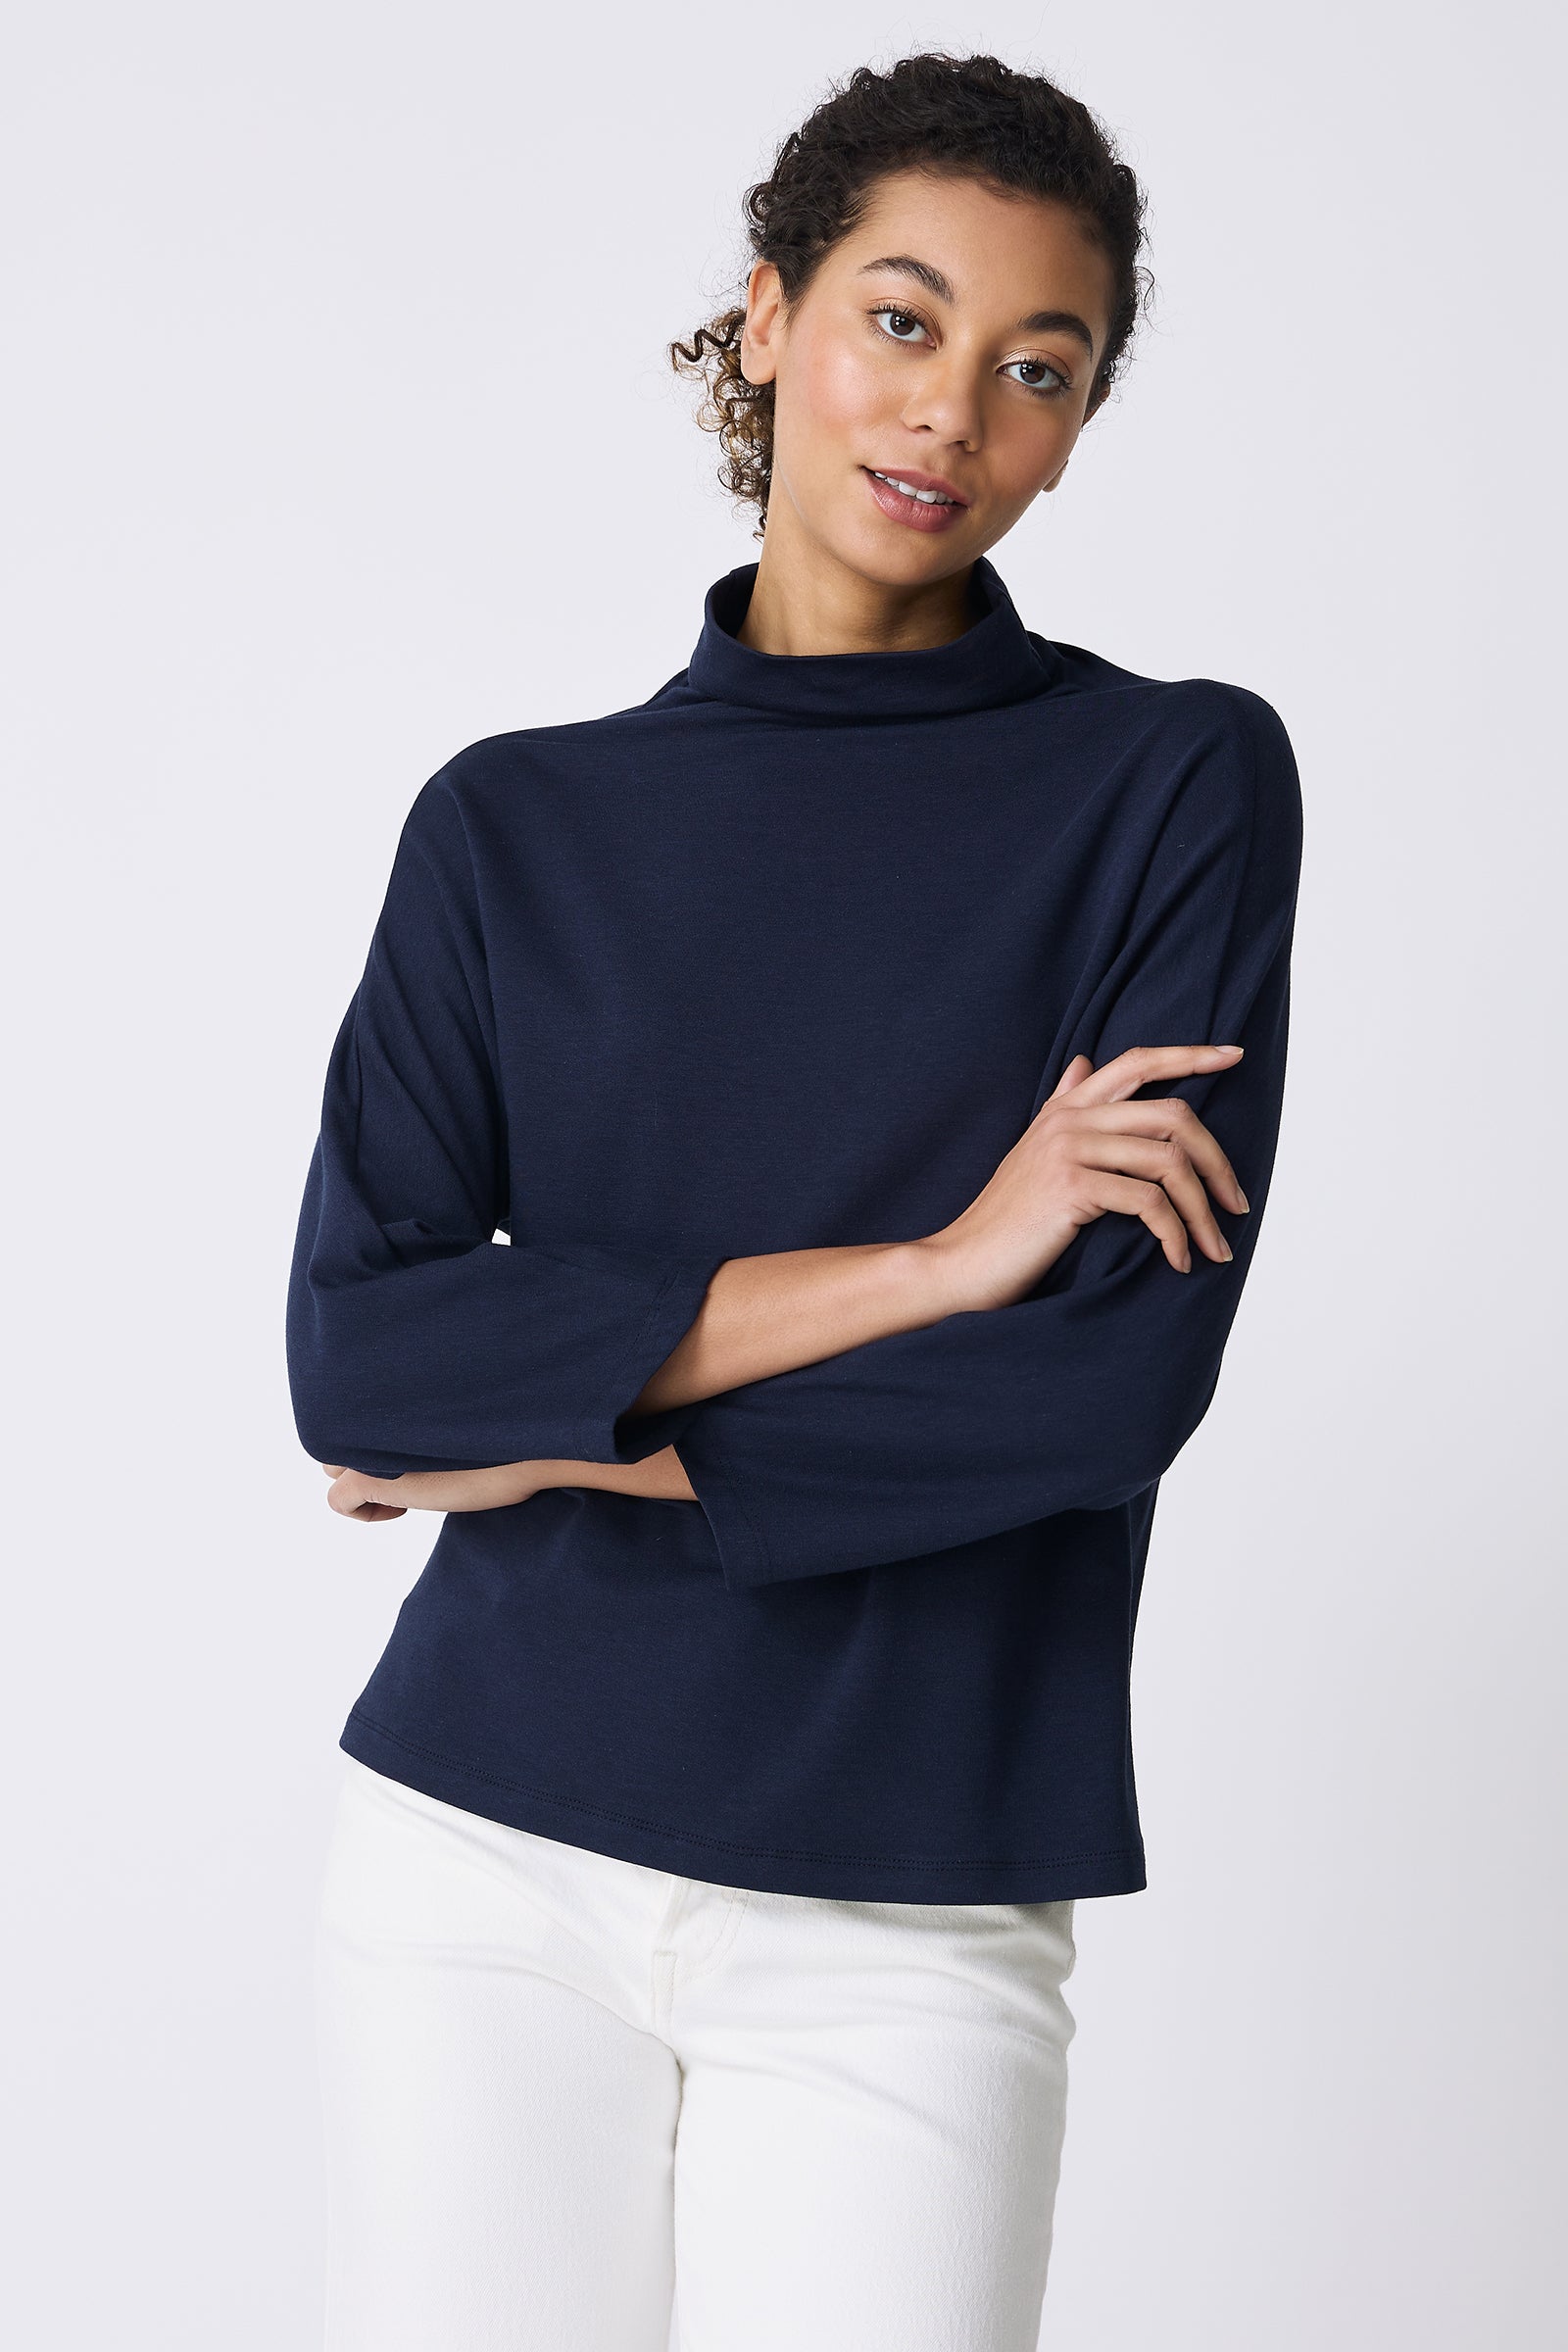 Kal Rieman Brigitte Mock Funnel in Navy on model with arms crossed front view